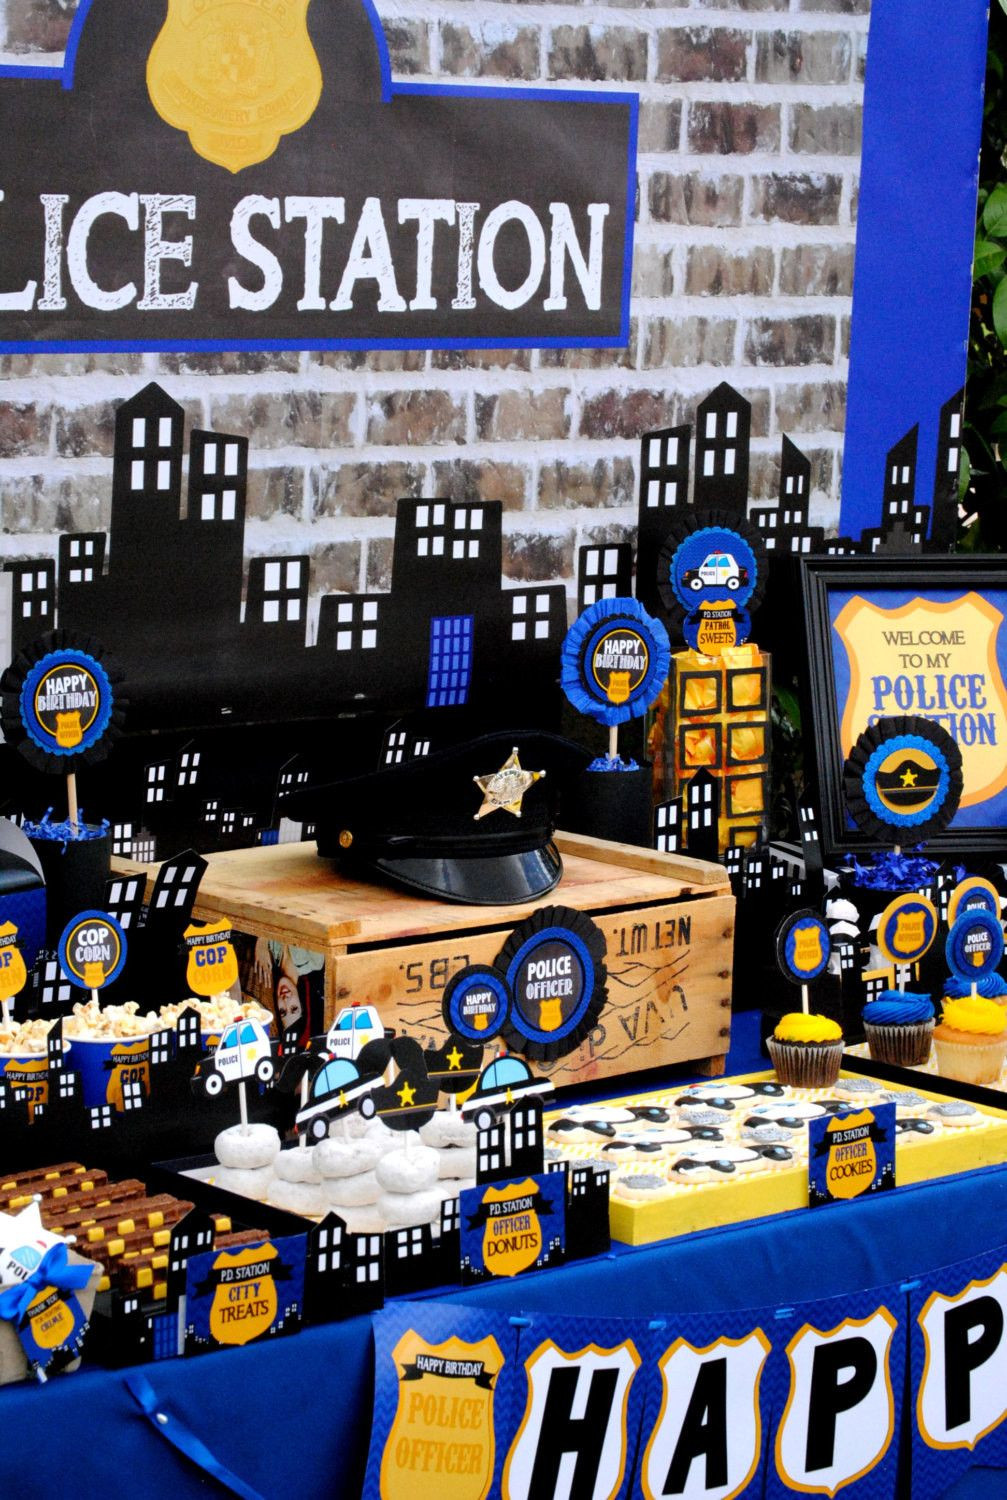 Police Birthday Party Ideas
 Patrol THANK YOU TAG Police Party Cop Policeman in